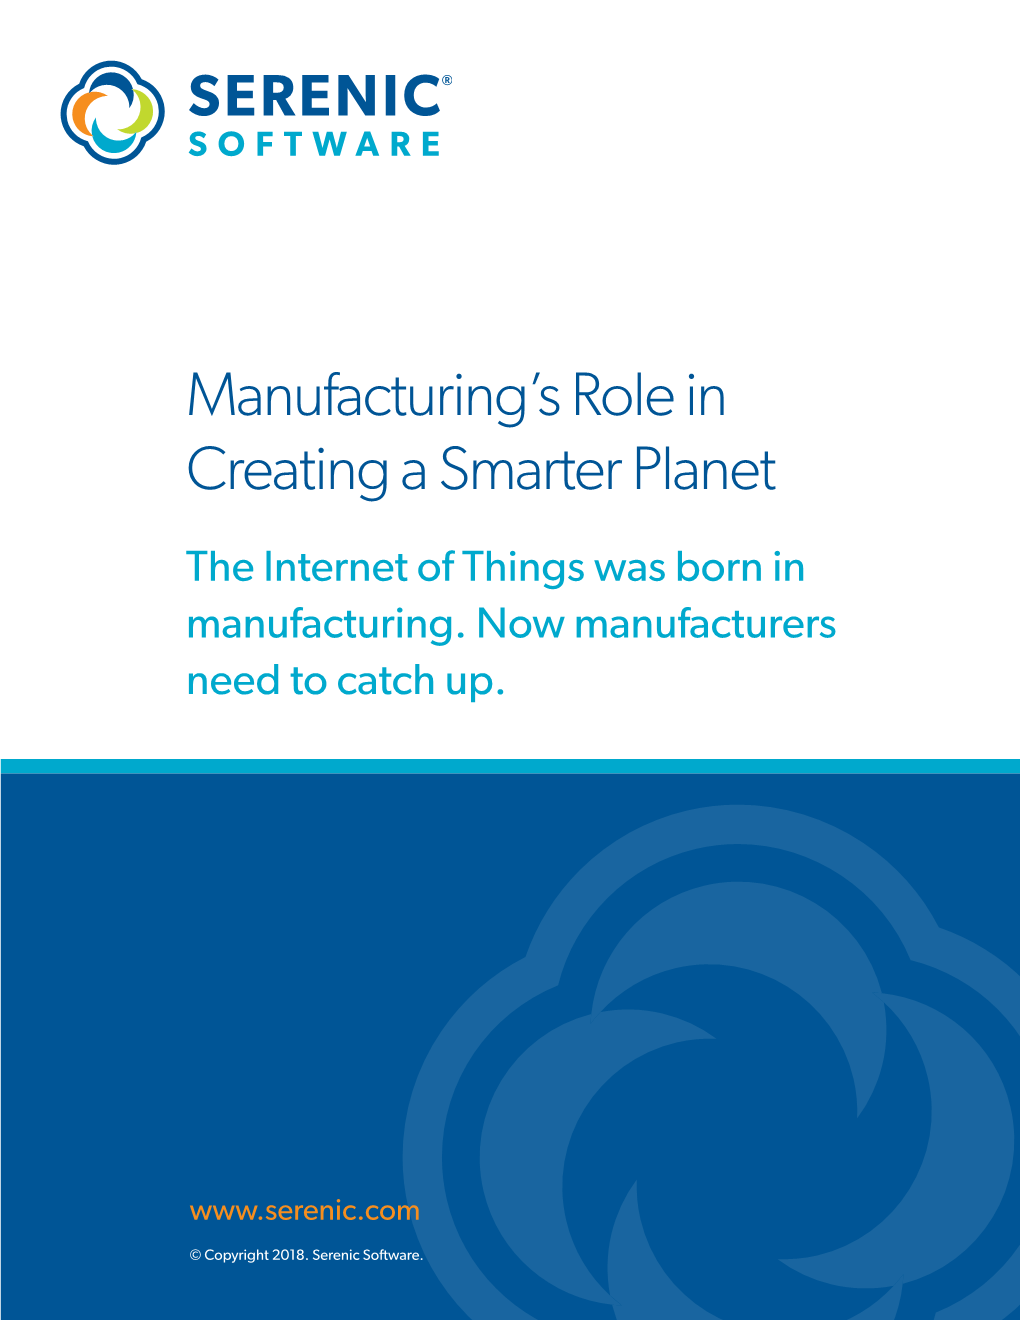 Manufacturing's Role in Creating a Smarter Planet